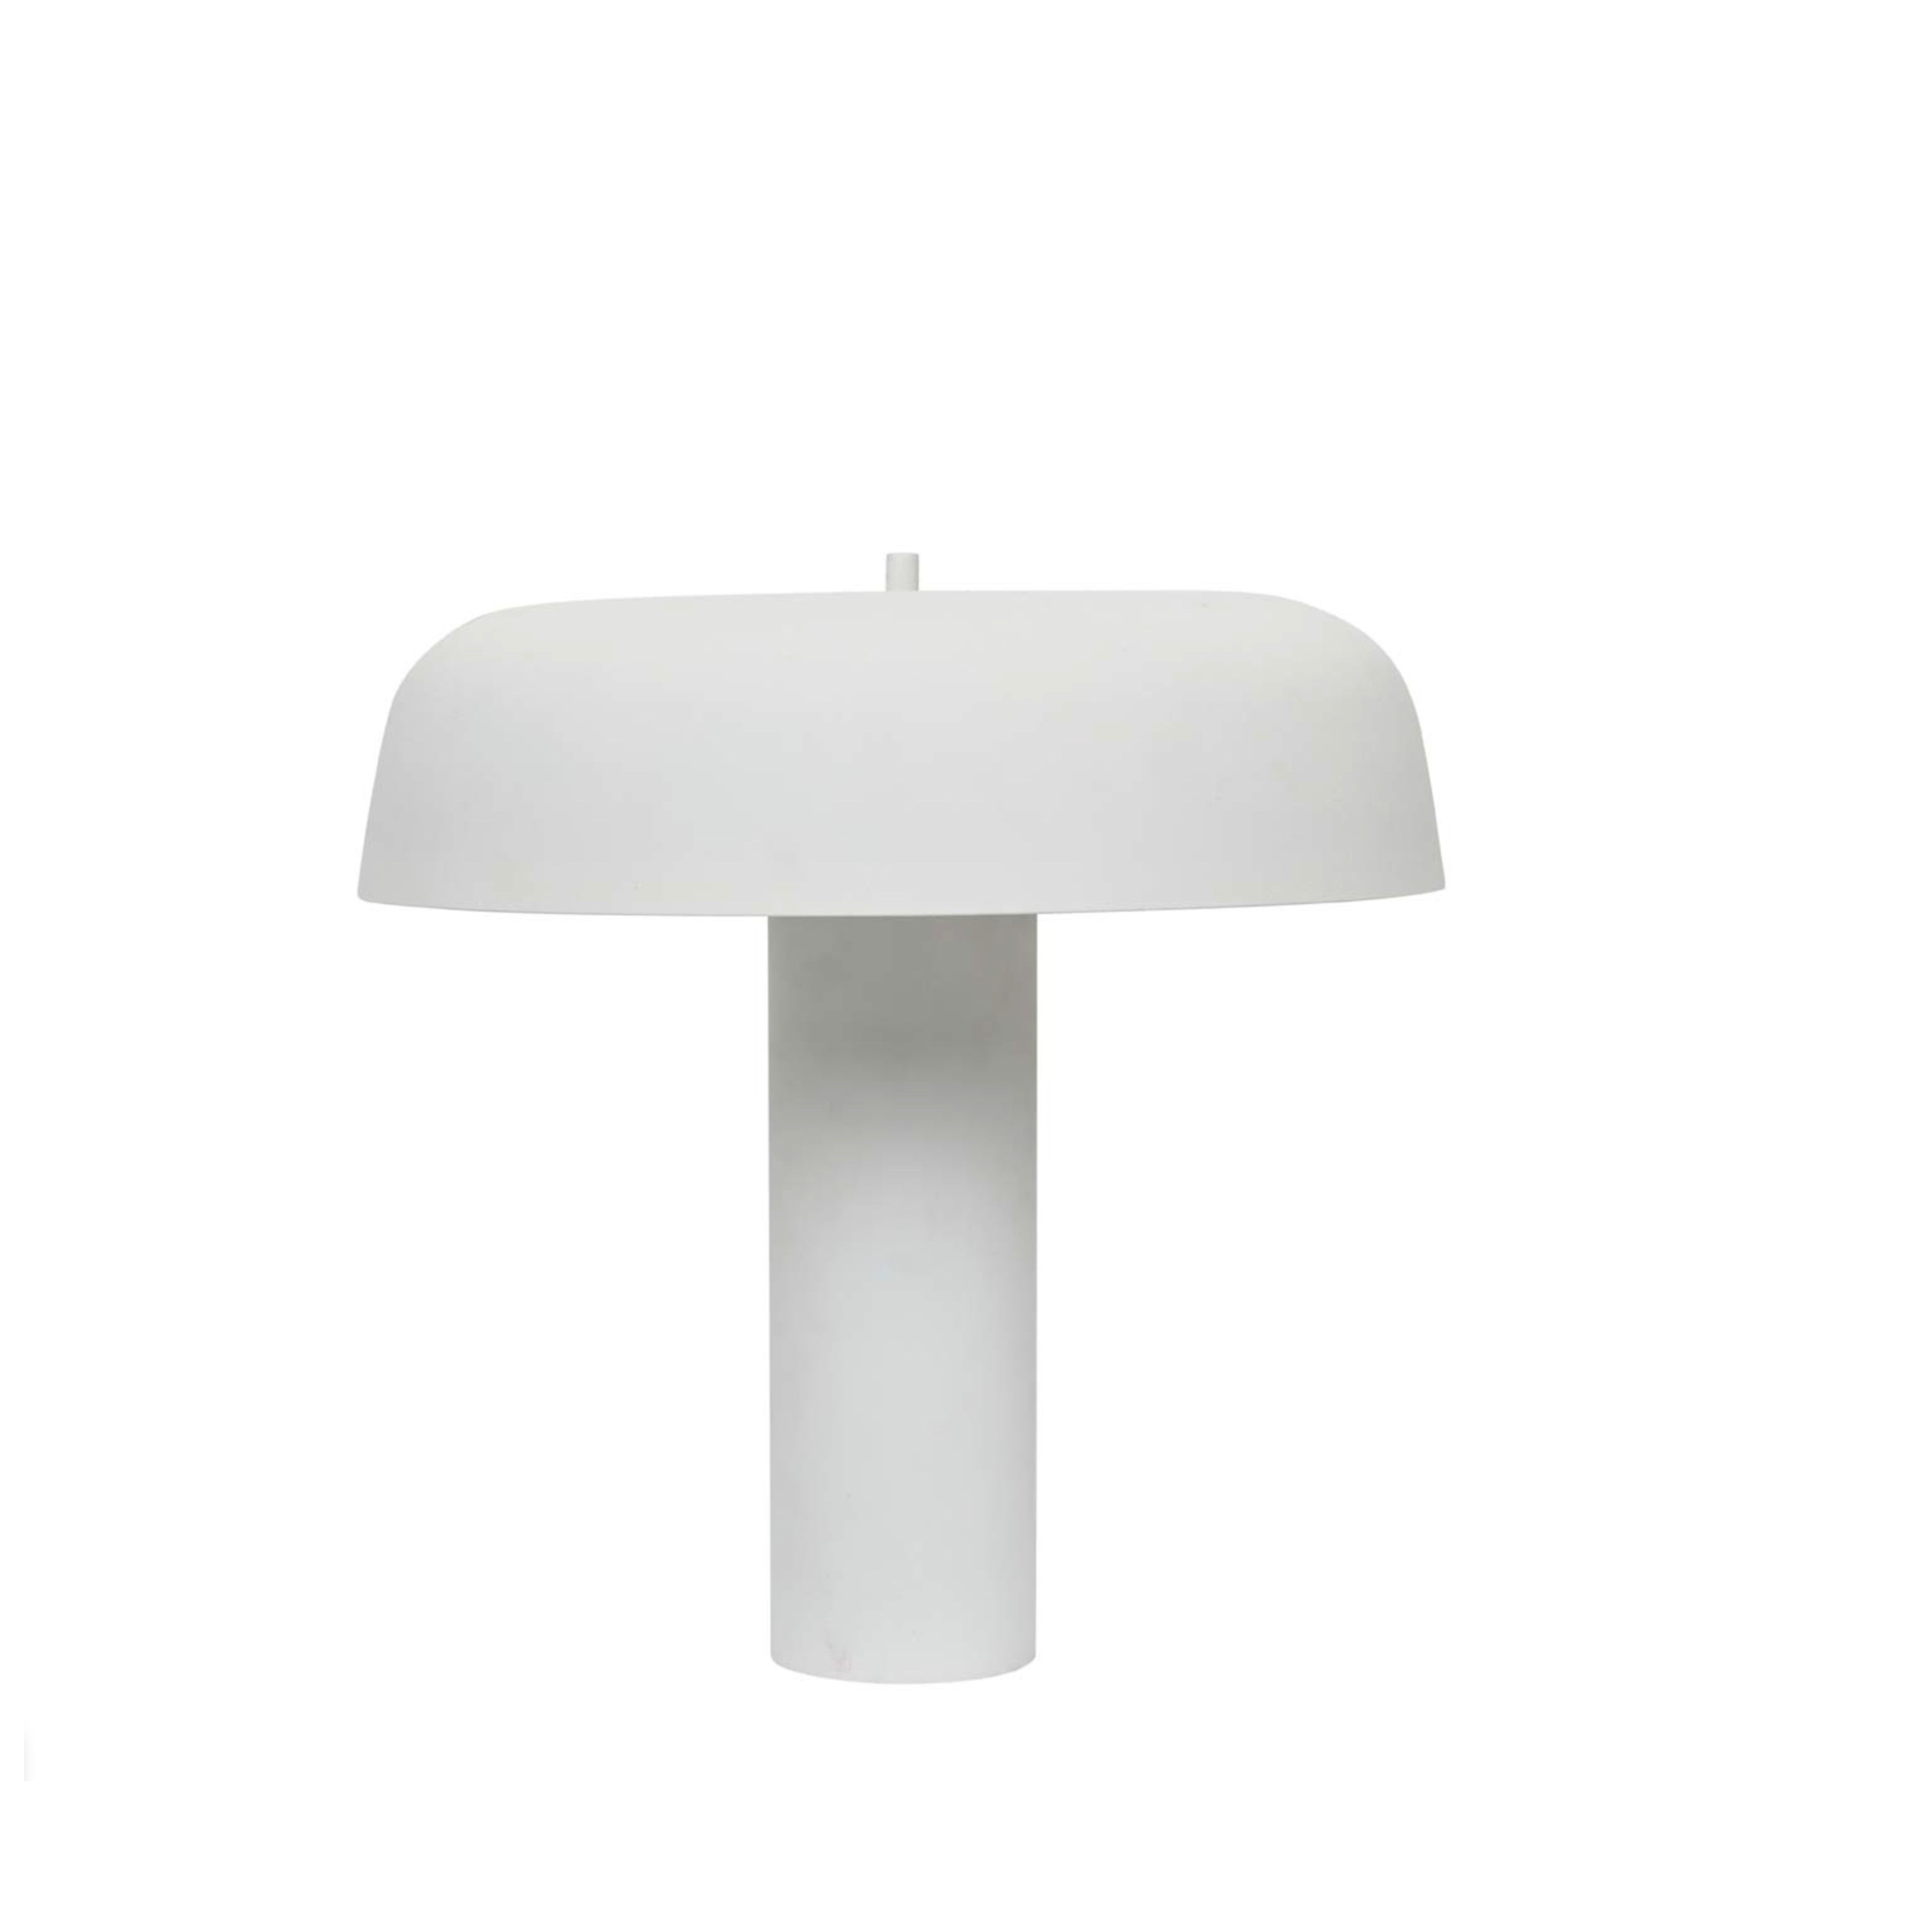 Easton Canopy Table Lamp White - With a sleek canopy shade, this contemporary table lamp is crafted in white textured metal.